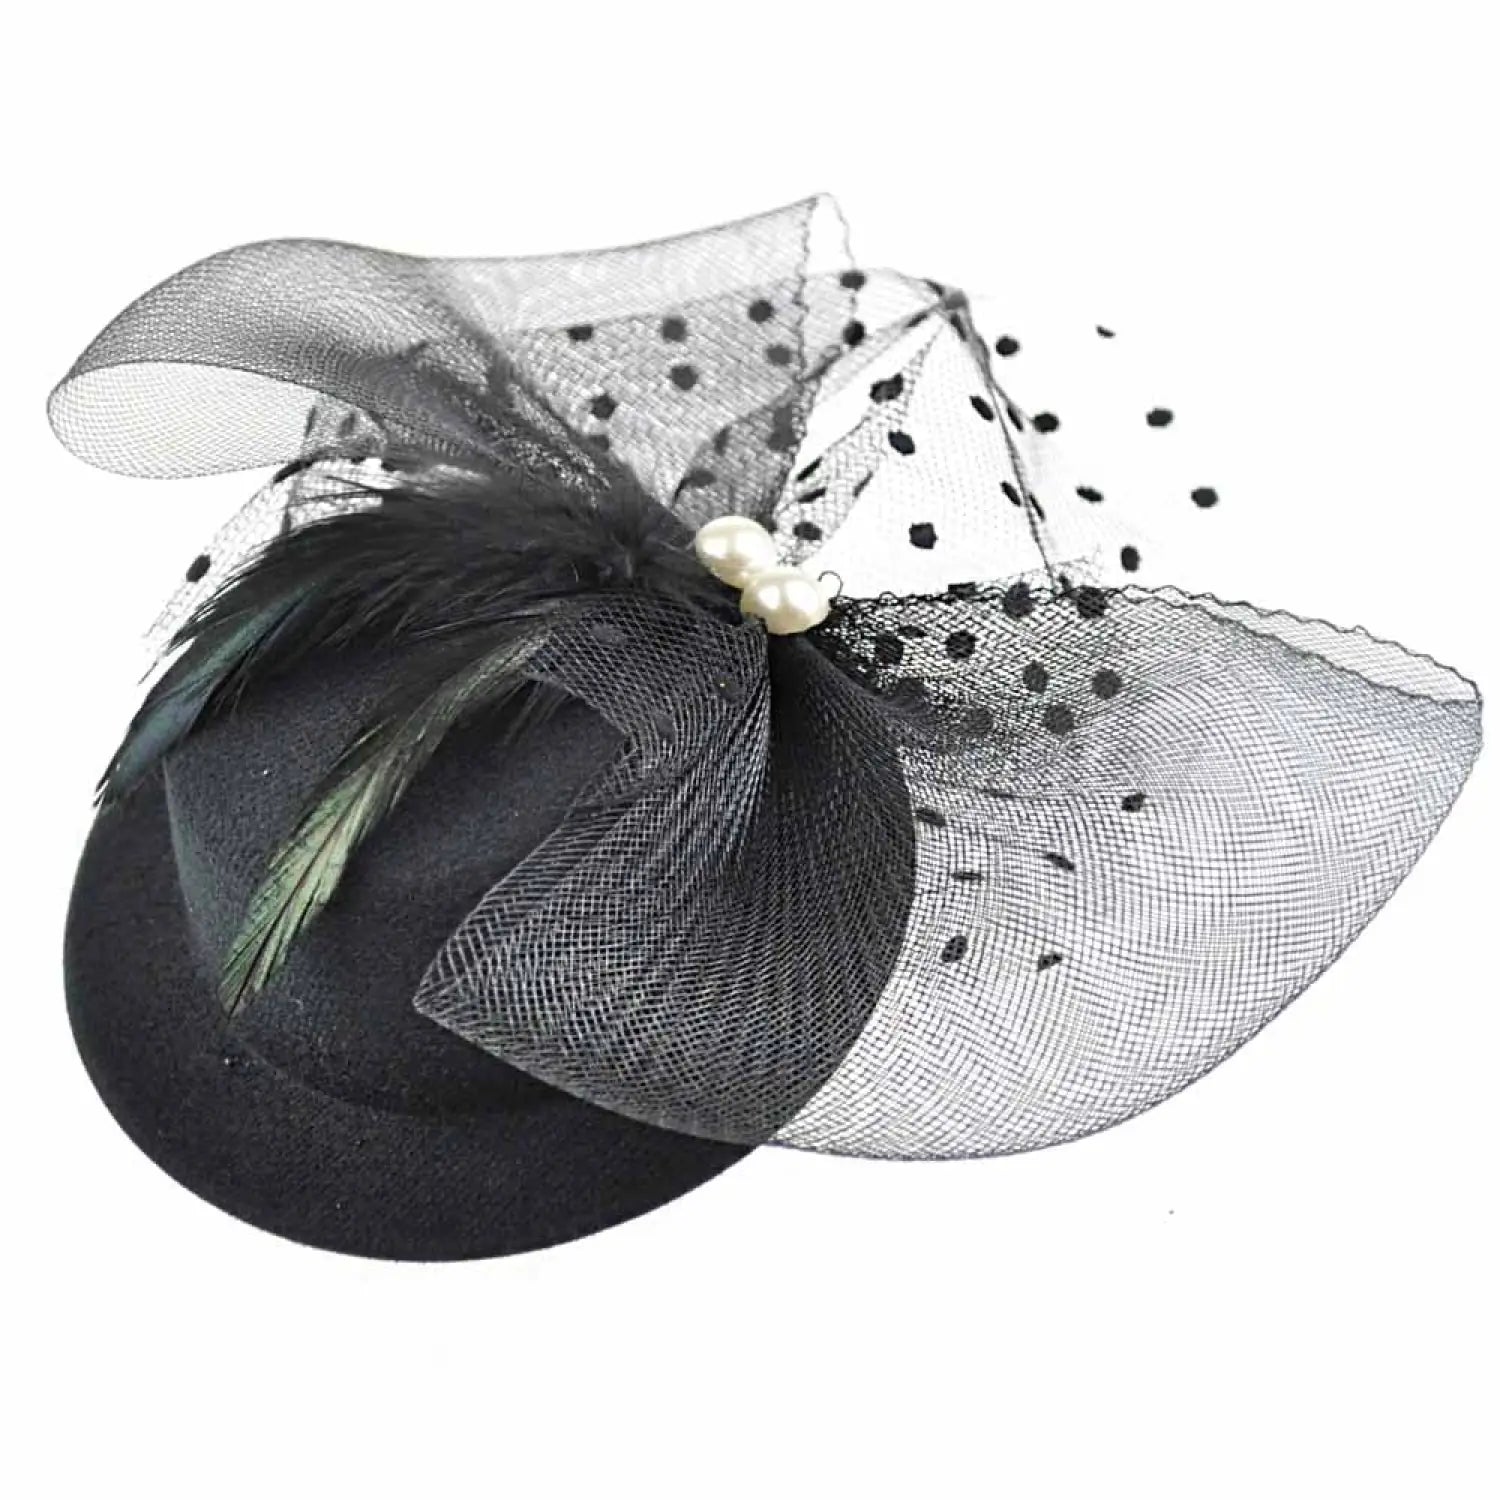 Black hat with white flower and feathers, Mini Top Hat Mesh & Pearl Fashion Fascinator.